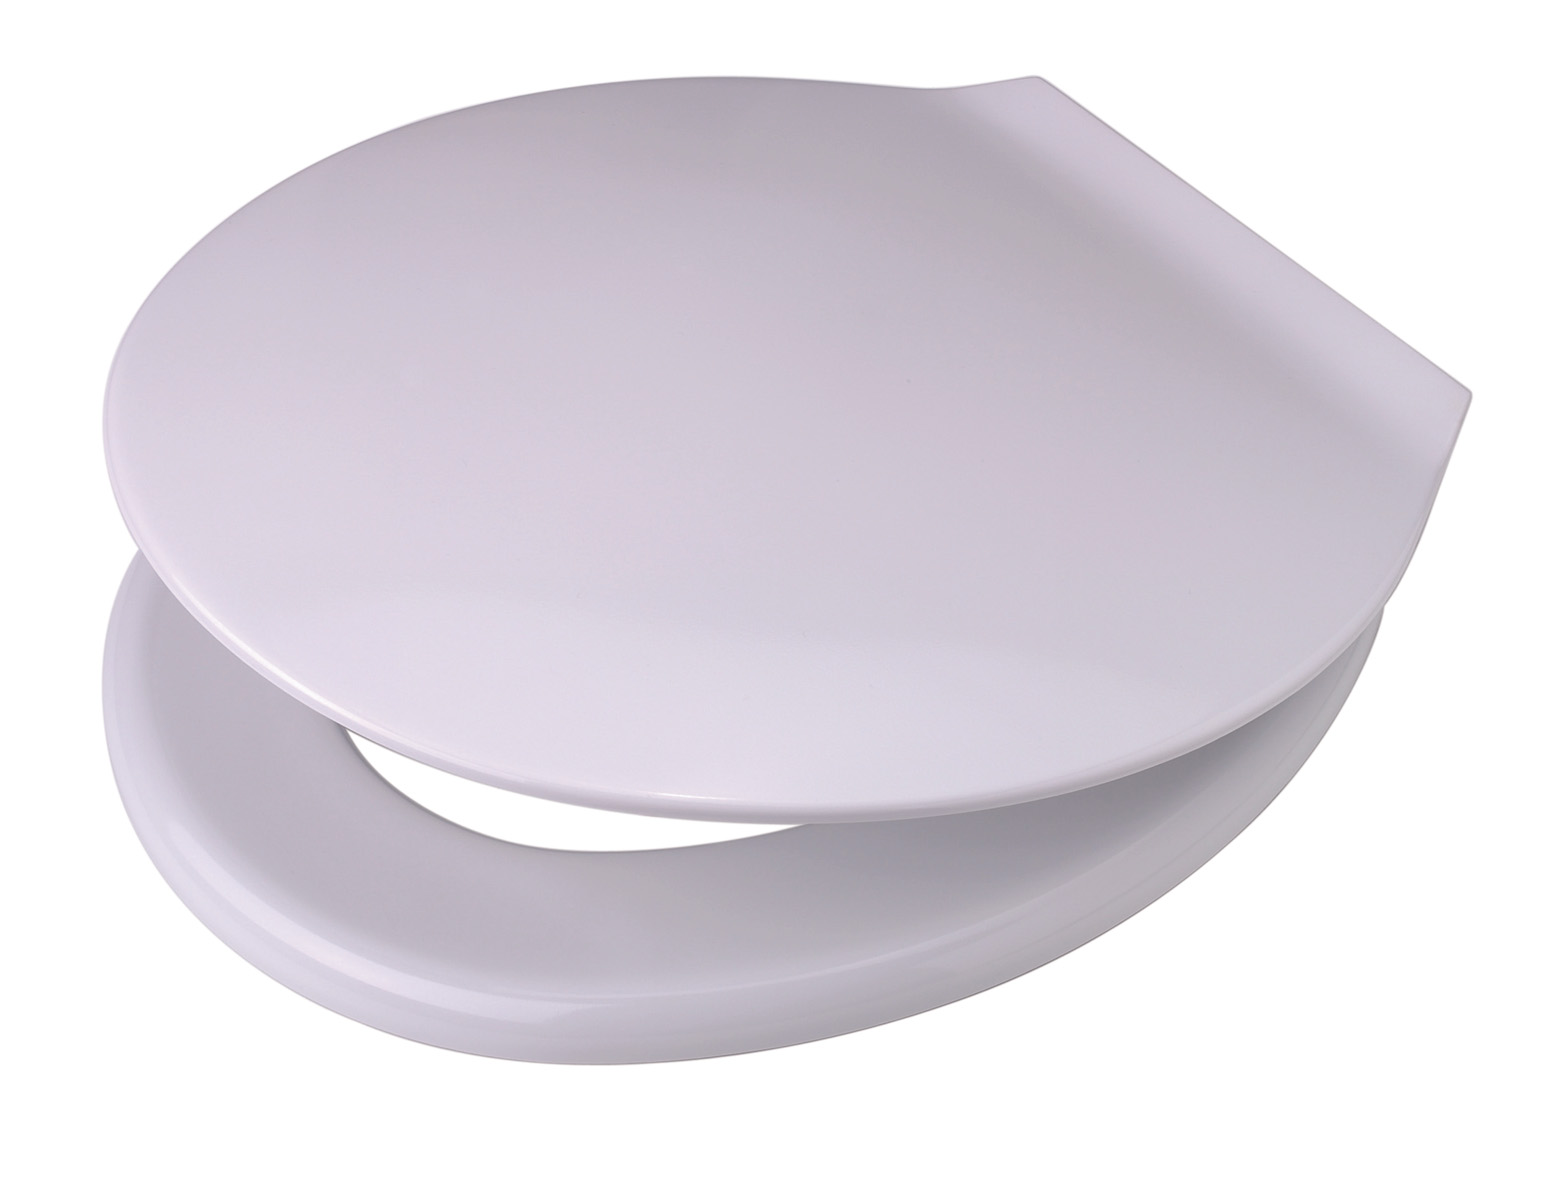 Picture of PAGETTE Exclusive toilet seat with cover 790821602 white